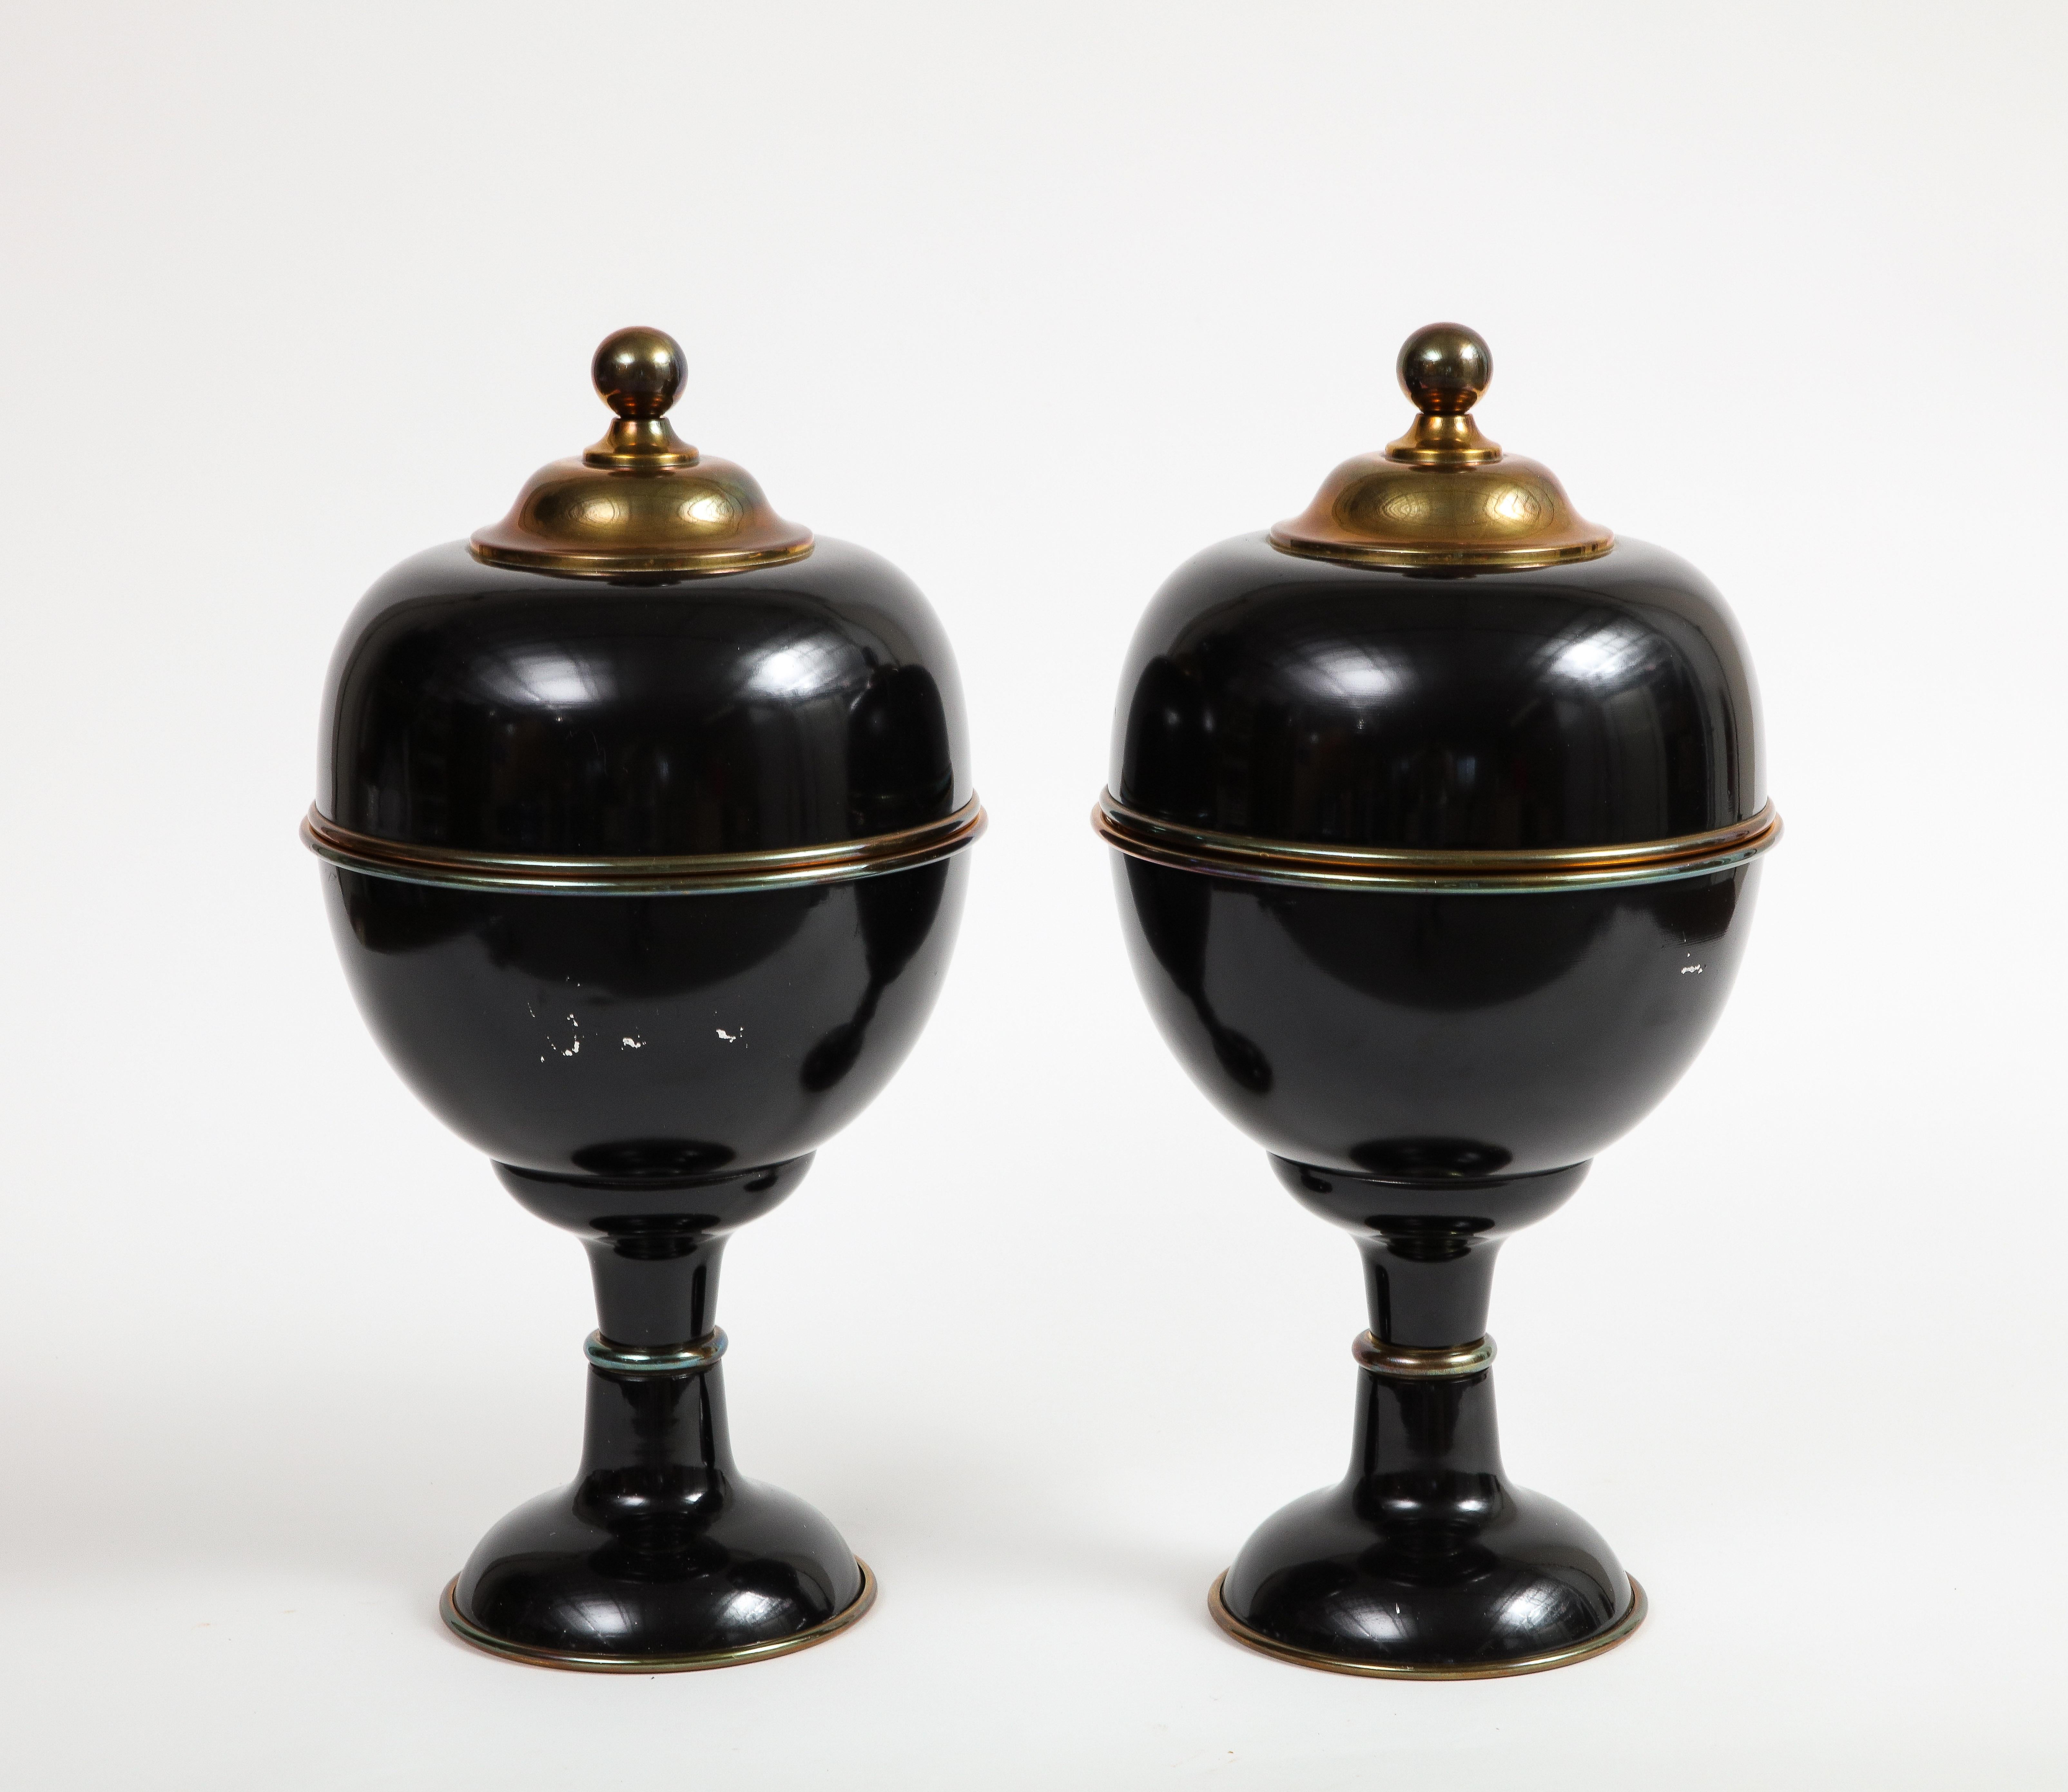 Pair of Large Decorative Black Enamel Urns with Brass Detail For Sale 2